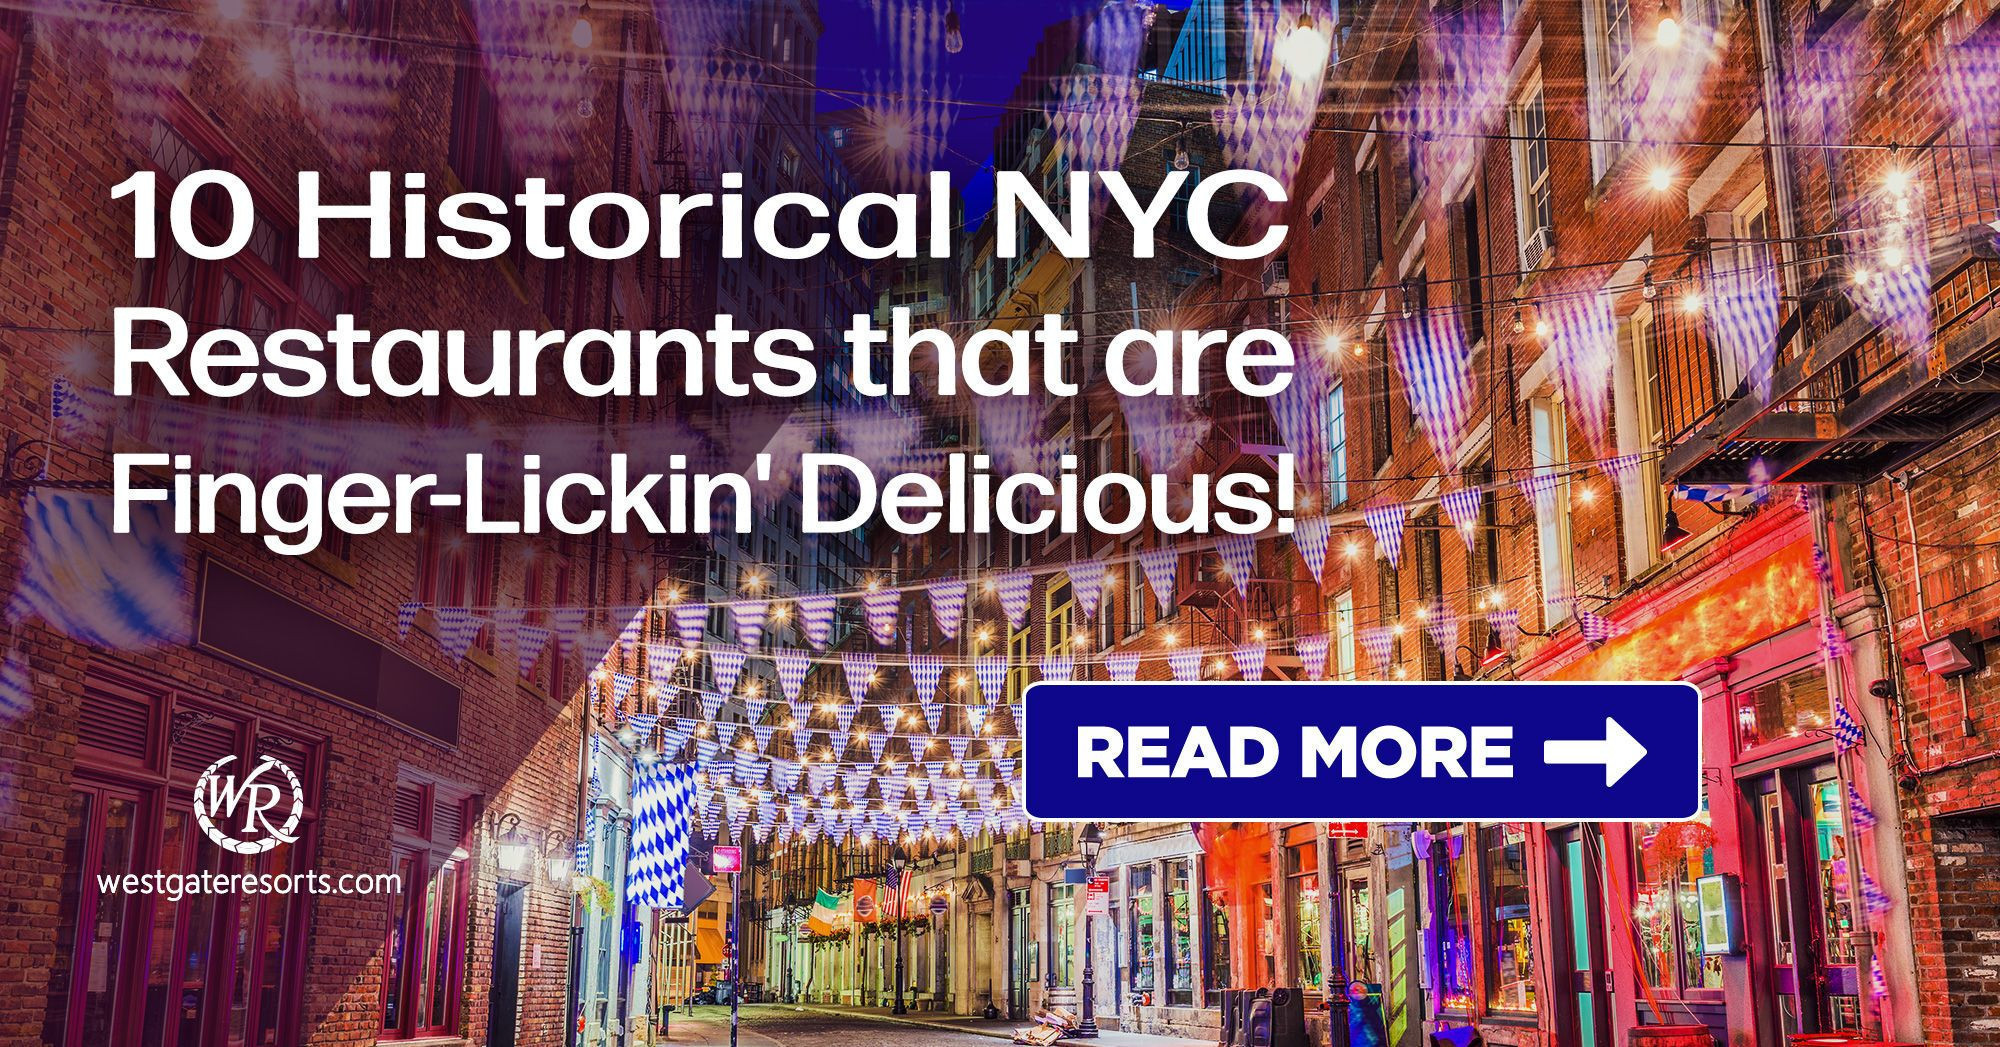 T10 Historical New York City Restaurants that are Finger-Lickin' Delicious!